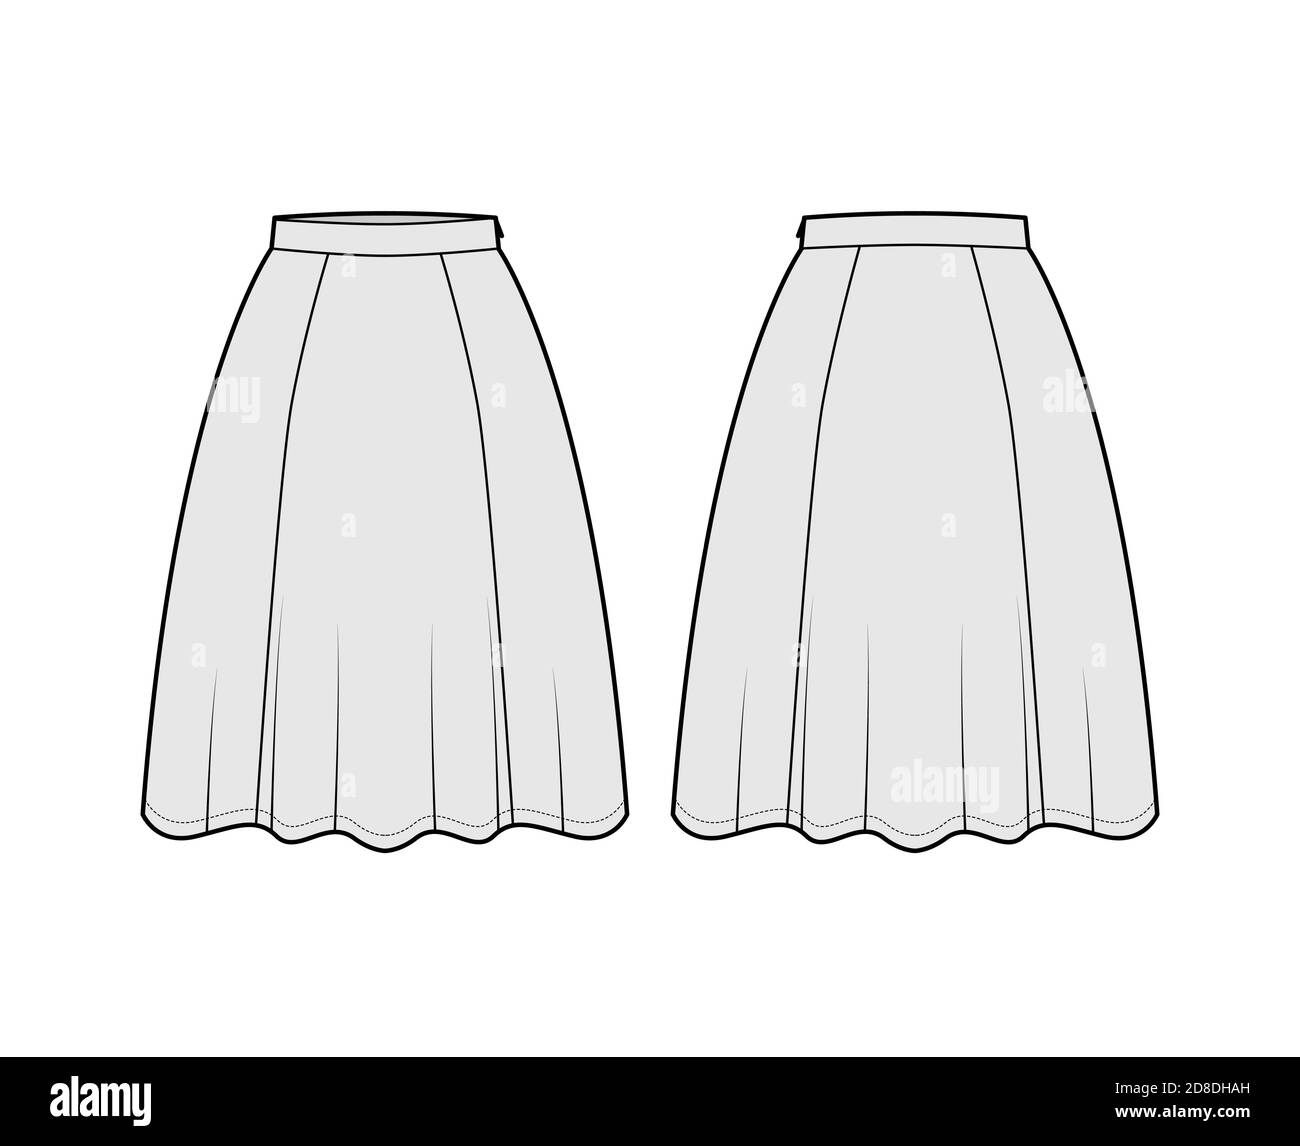 Skirt six gore technical fashion illustration with knee silhouette ...